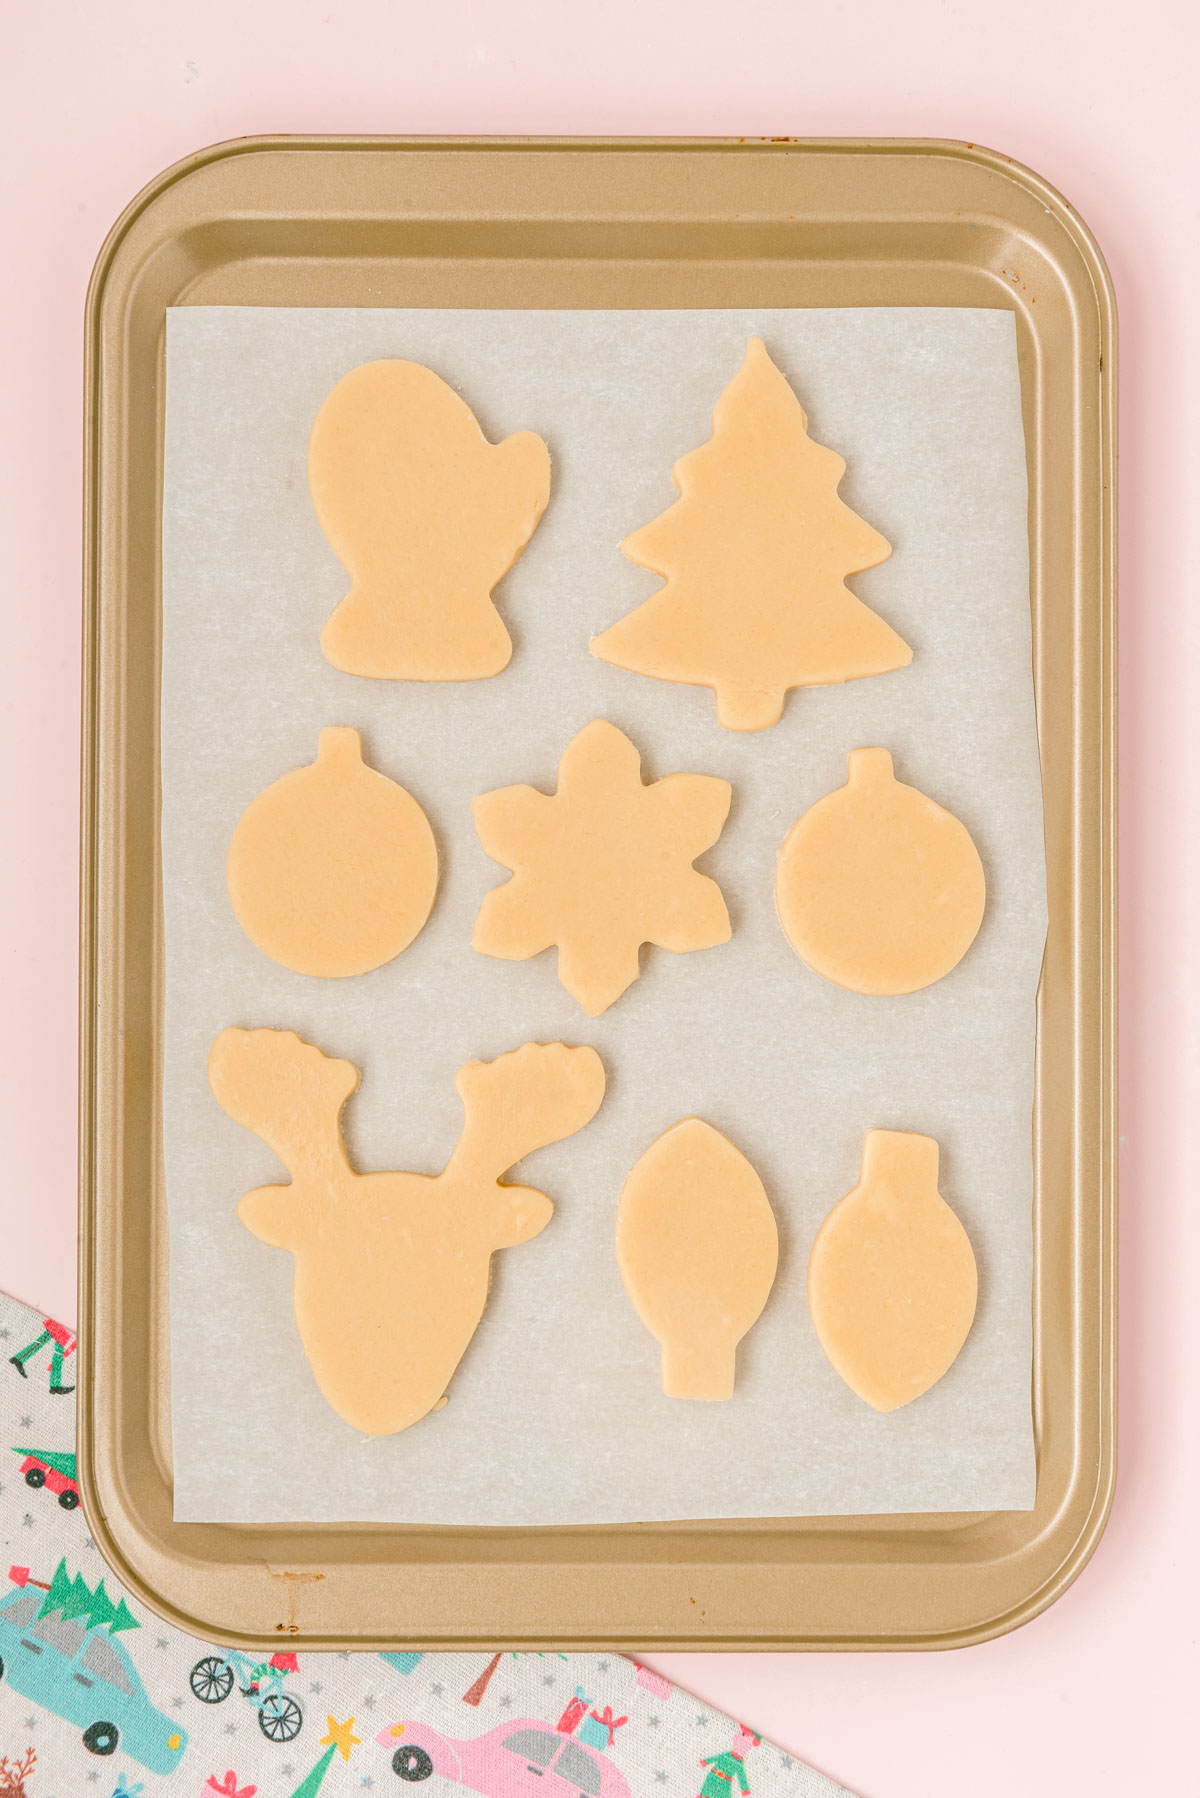 Cut out sugar cookies on a baking pan ready to bake.